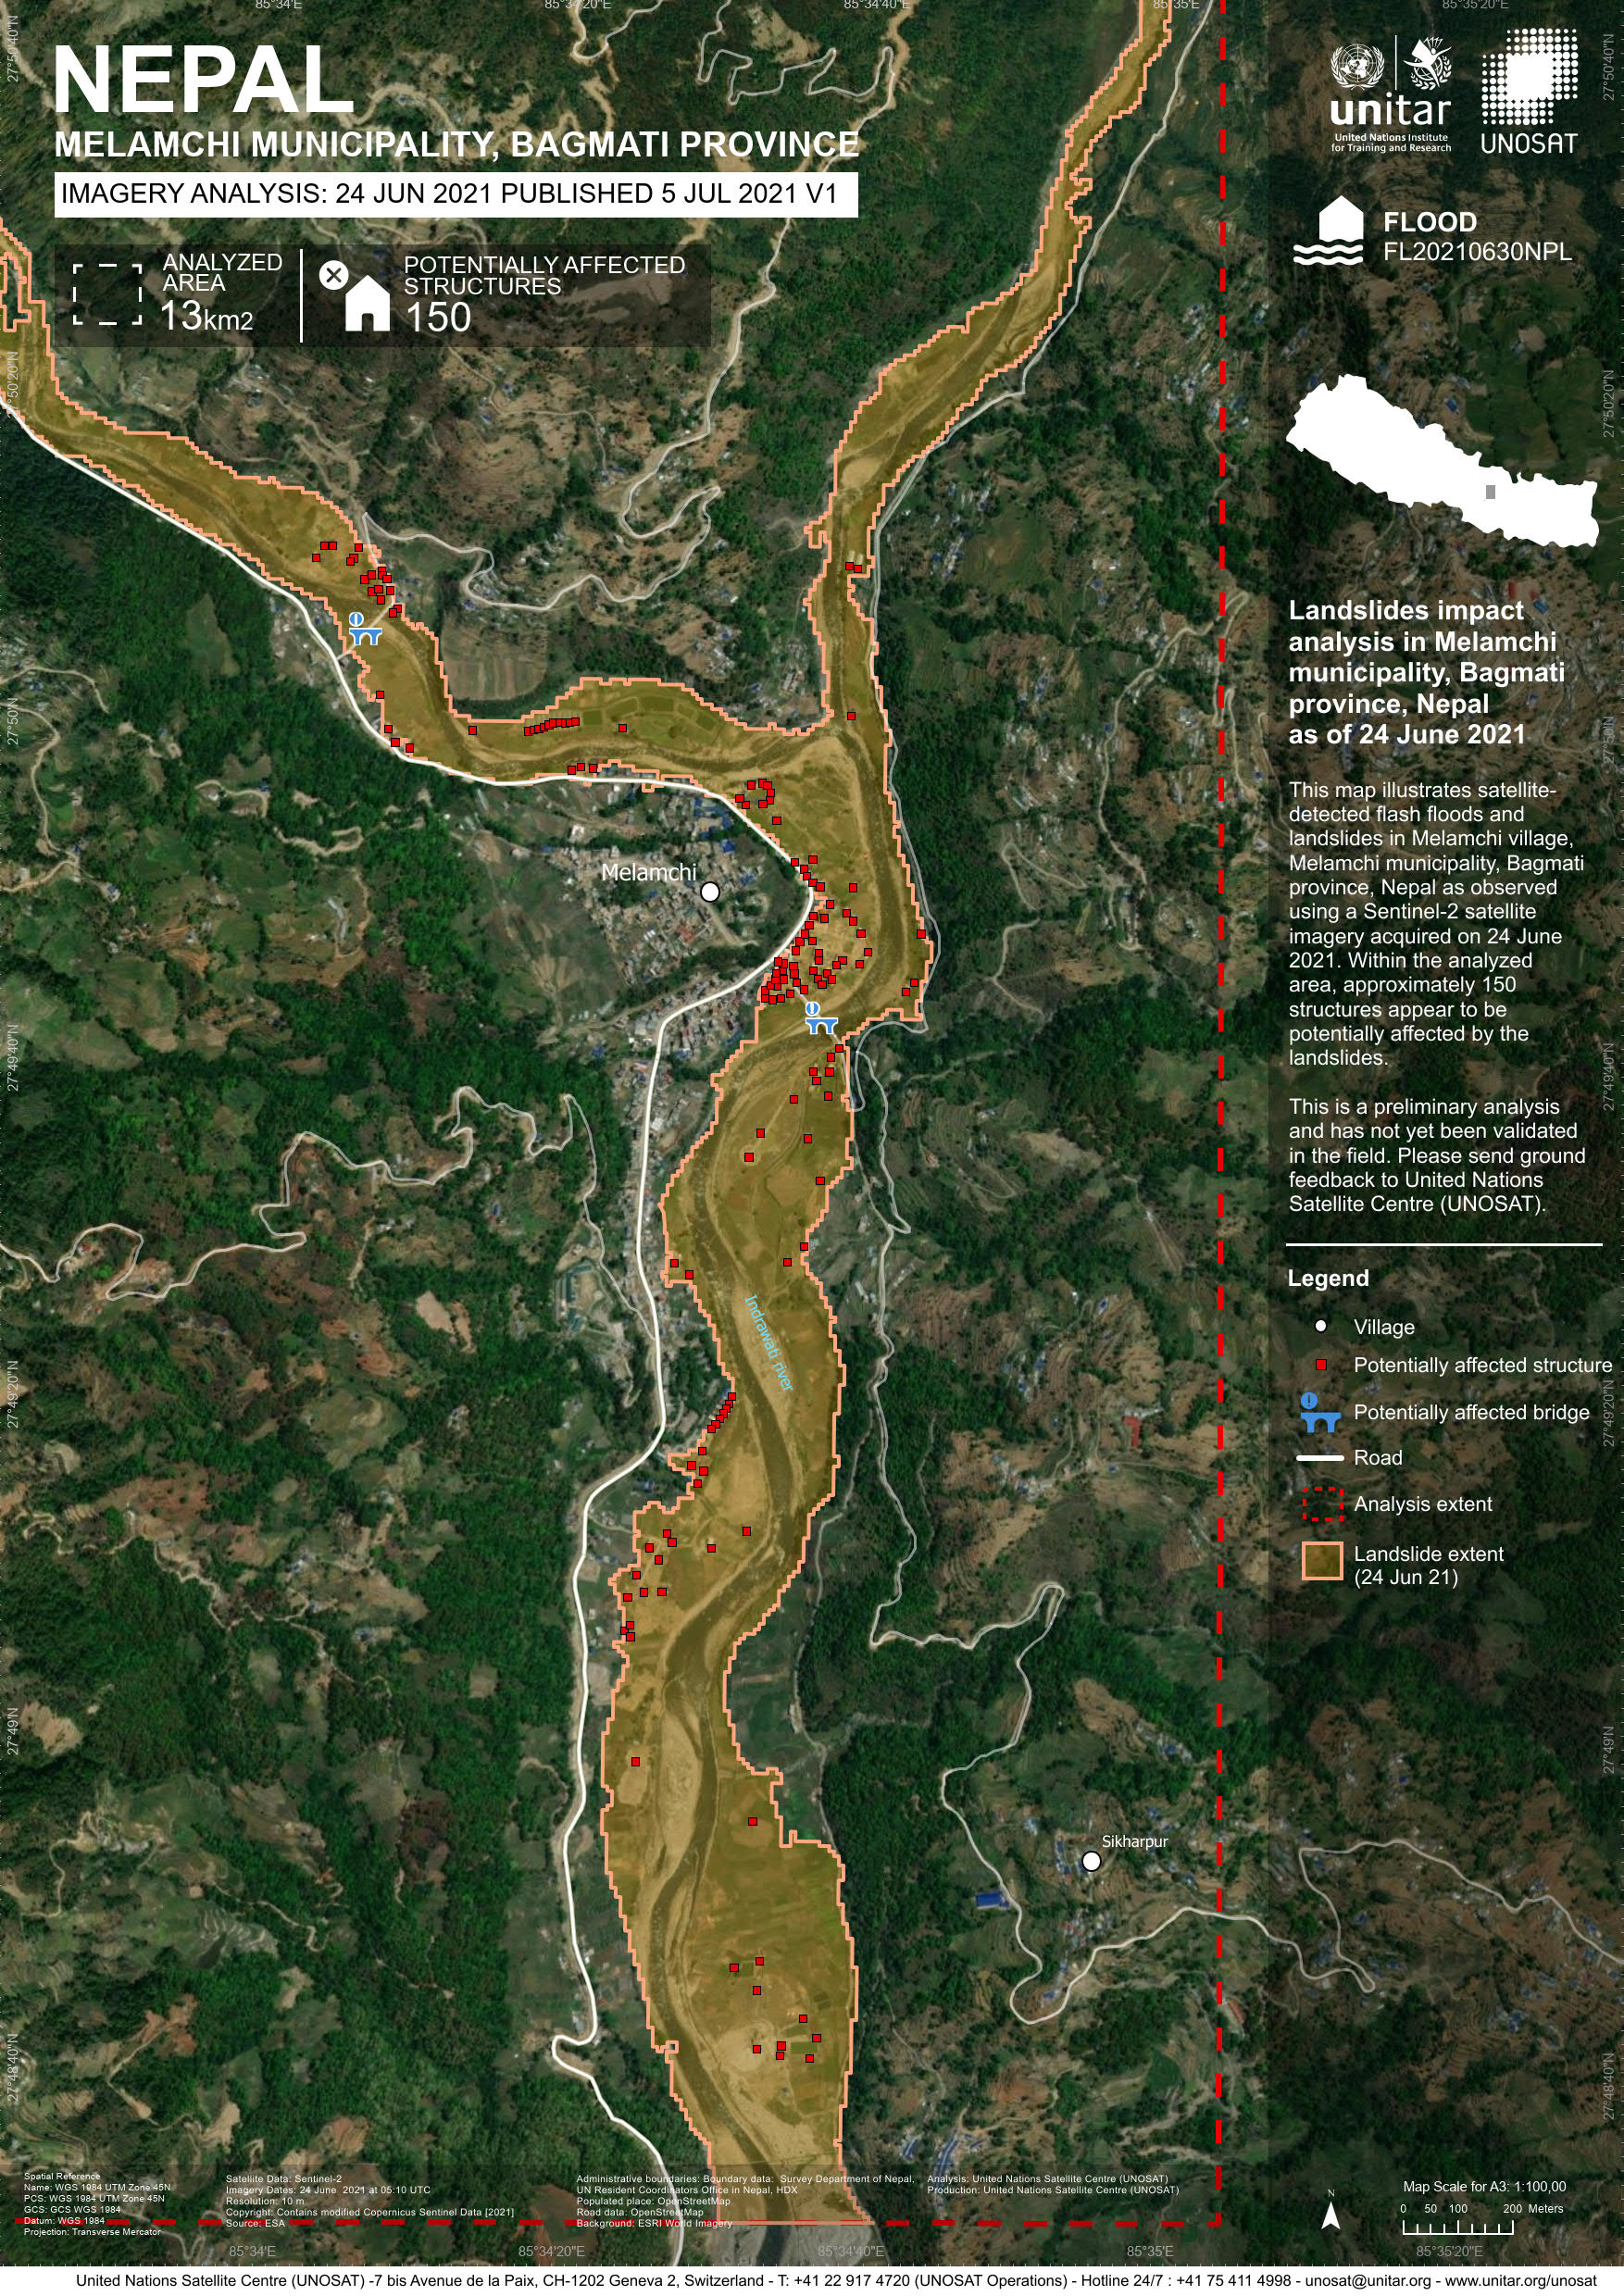 Product Links PDF (4.6MB)     - Static viewing and printing SHAPEFILE          - Download a Shapefile of data WEBMAP          - Dynamic viewing in a browser GEODATABASE   - Download data in the ESRI format  This map illustrates satellite-detected flash floods and landslides in Melamchi village, Melamchi Municipality, Bagmati province, Nepal as observed using Sentinel-2 satellite imagery acquired on 24 June 2021. Within the analyzed area, approximately 150 structures appear to be potentially affected by the landslides. This is a preliminary analysis and has not yet been validated in the field. Please send ground feedback to United Nations Satellite Centre (UNOSAT). Satellite Data: Sentinel-2 Imagery Dates: 24 June 2021 at 05:10 UTC Resolution: 10 m Copyright: Contains modified Copernicus Sentinel Data [2021] Source: ESA Administrative boundaries: Boundary data: Survey Department of Nepal, UN Resident Coordinators Office in Nepal, HDX Populated place: OpenStreetMap Road data: OpenStreetMap Background: ESRI World Imagery Analysis: United Nations Satellite Centre (UNOSAT) Production: United Nations Satellite Centre (UNOSAT)